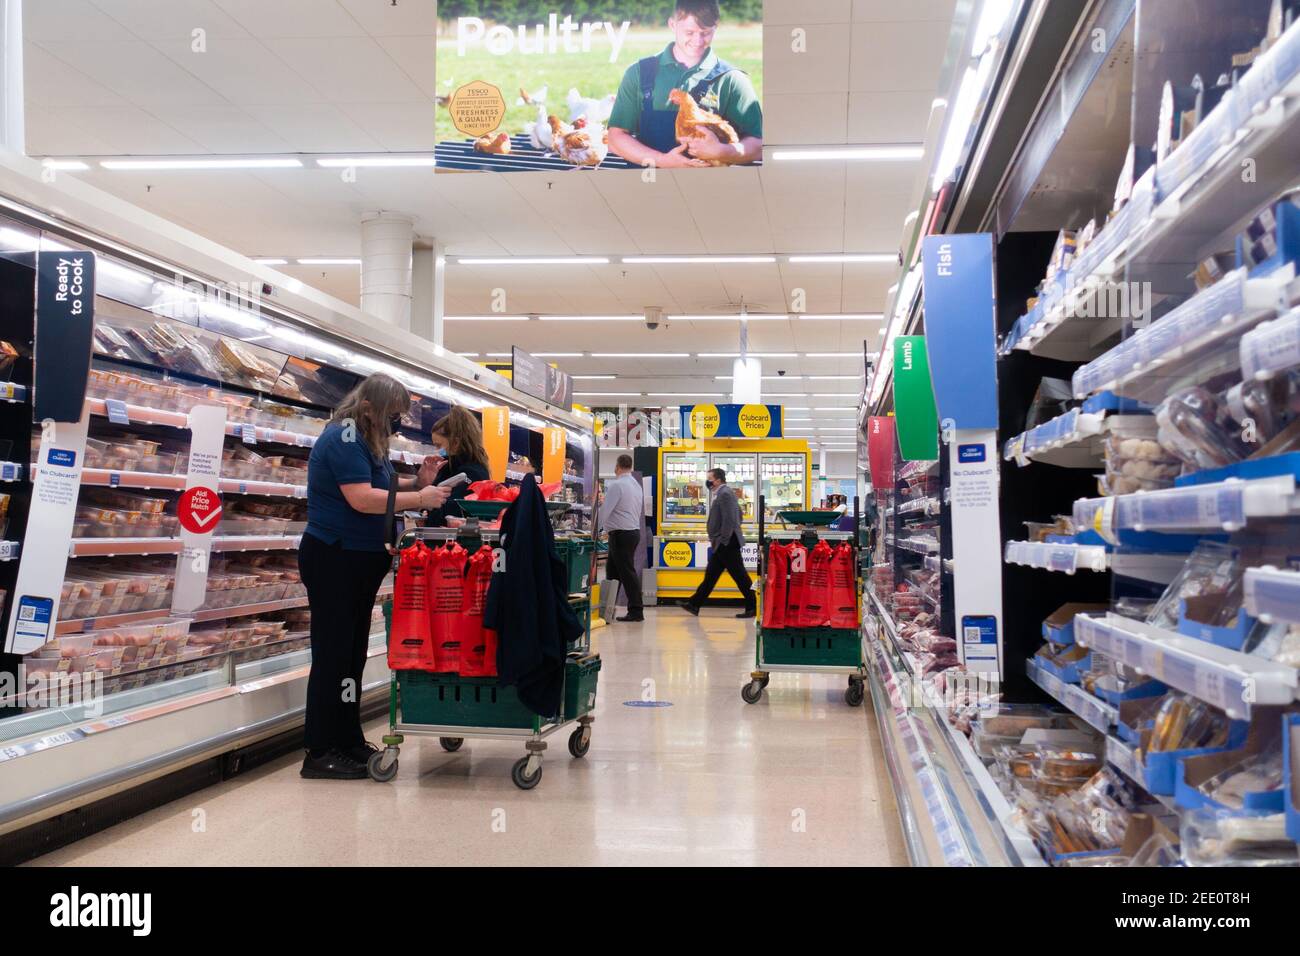 Ashford, Kent, UK. 15th Feb, 2021. Tesco supermarket workers fulfilling online food orders by picking items from the poultry aisle shelves in Ashford, Kent. Photo Credit: Alamy Live News Stock Photo